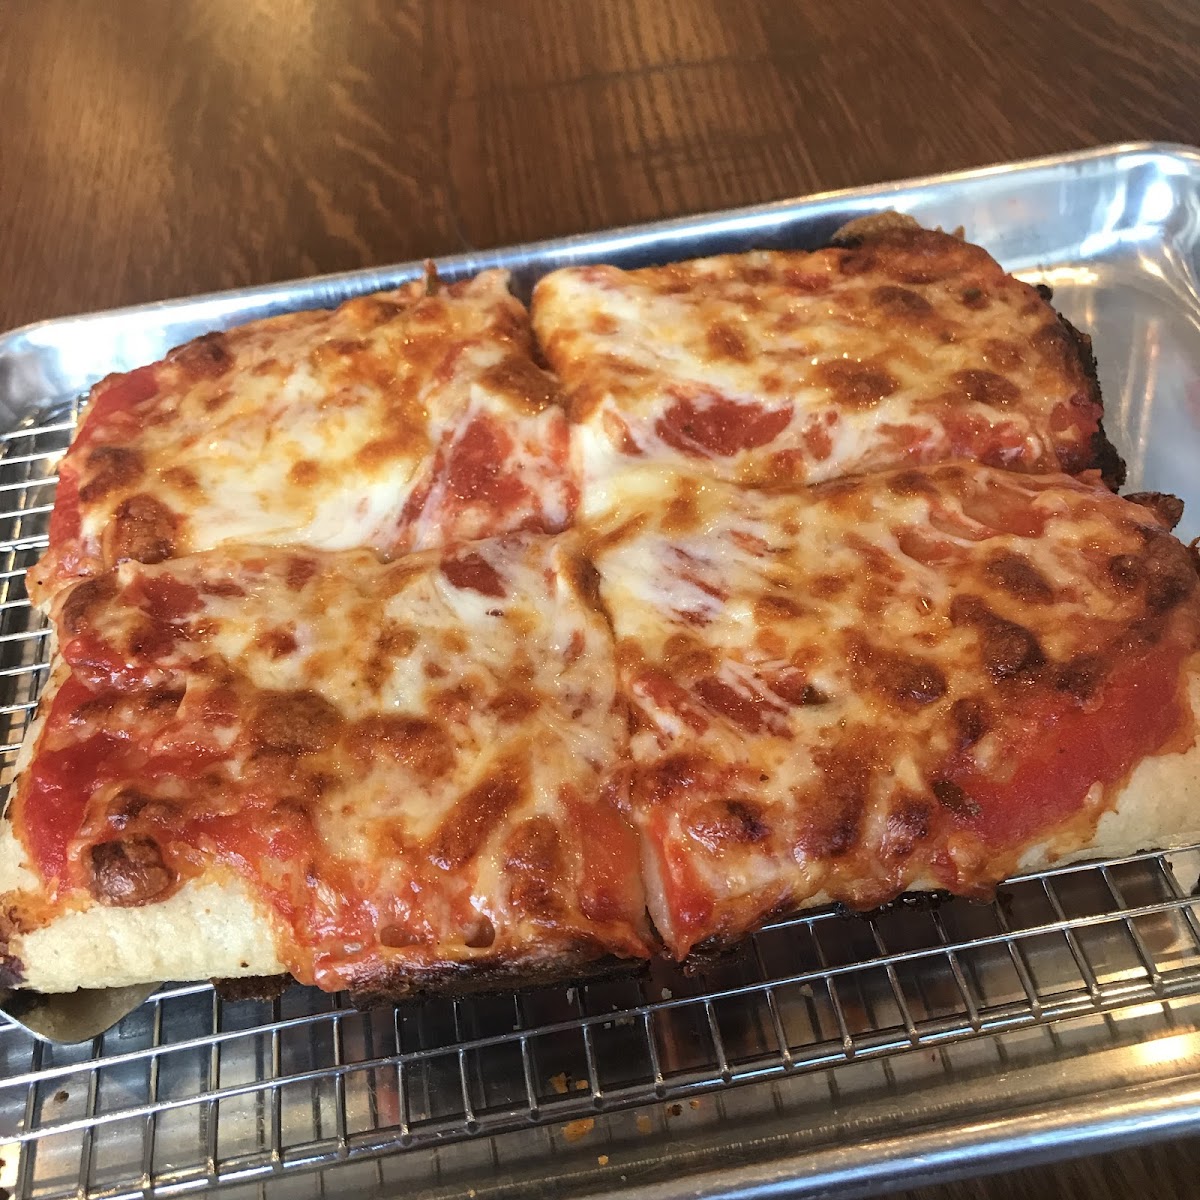 I haven’t had real pizza in 7 years. I was completely blown away from the flavor, texture, quality of ingredients care put into this pizza. Pizza so good it reminded me of my Sicilian grandmothers